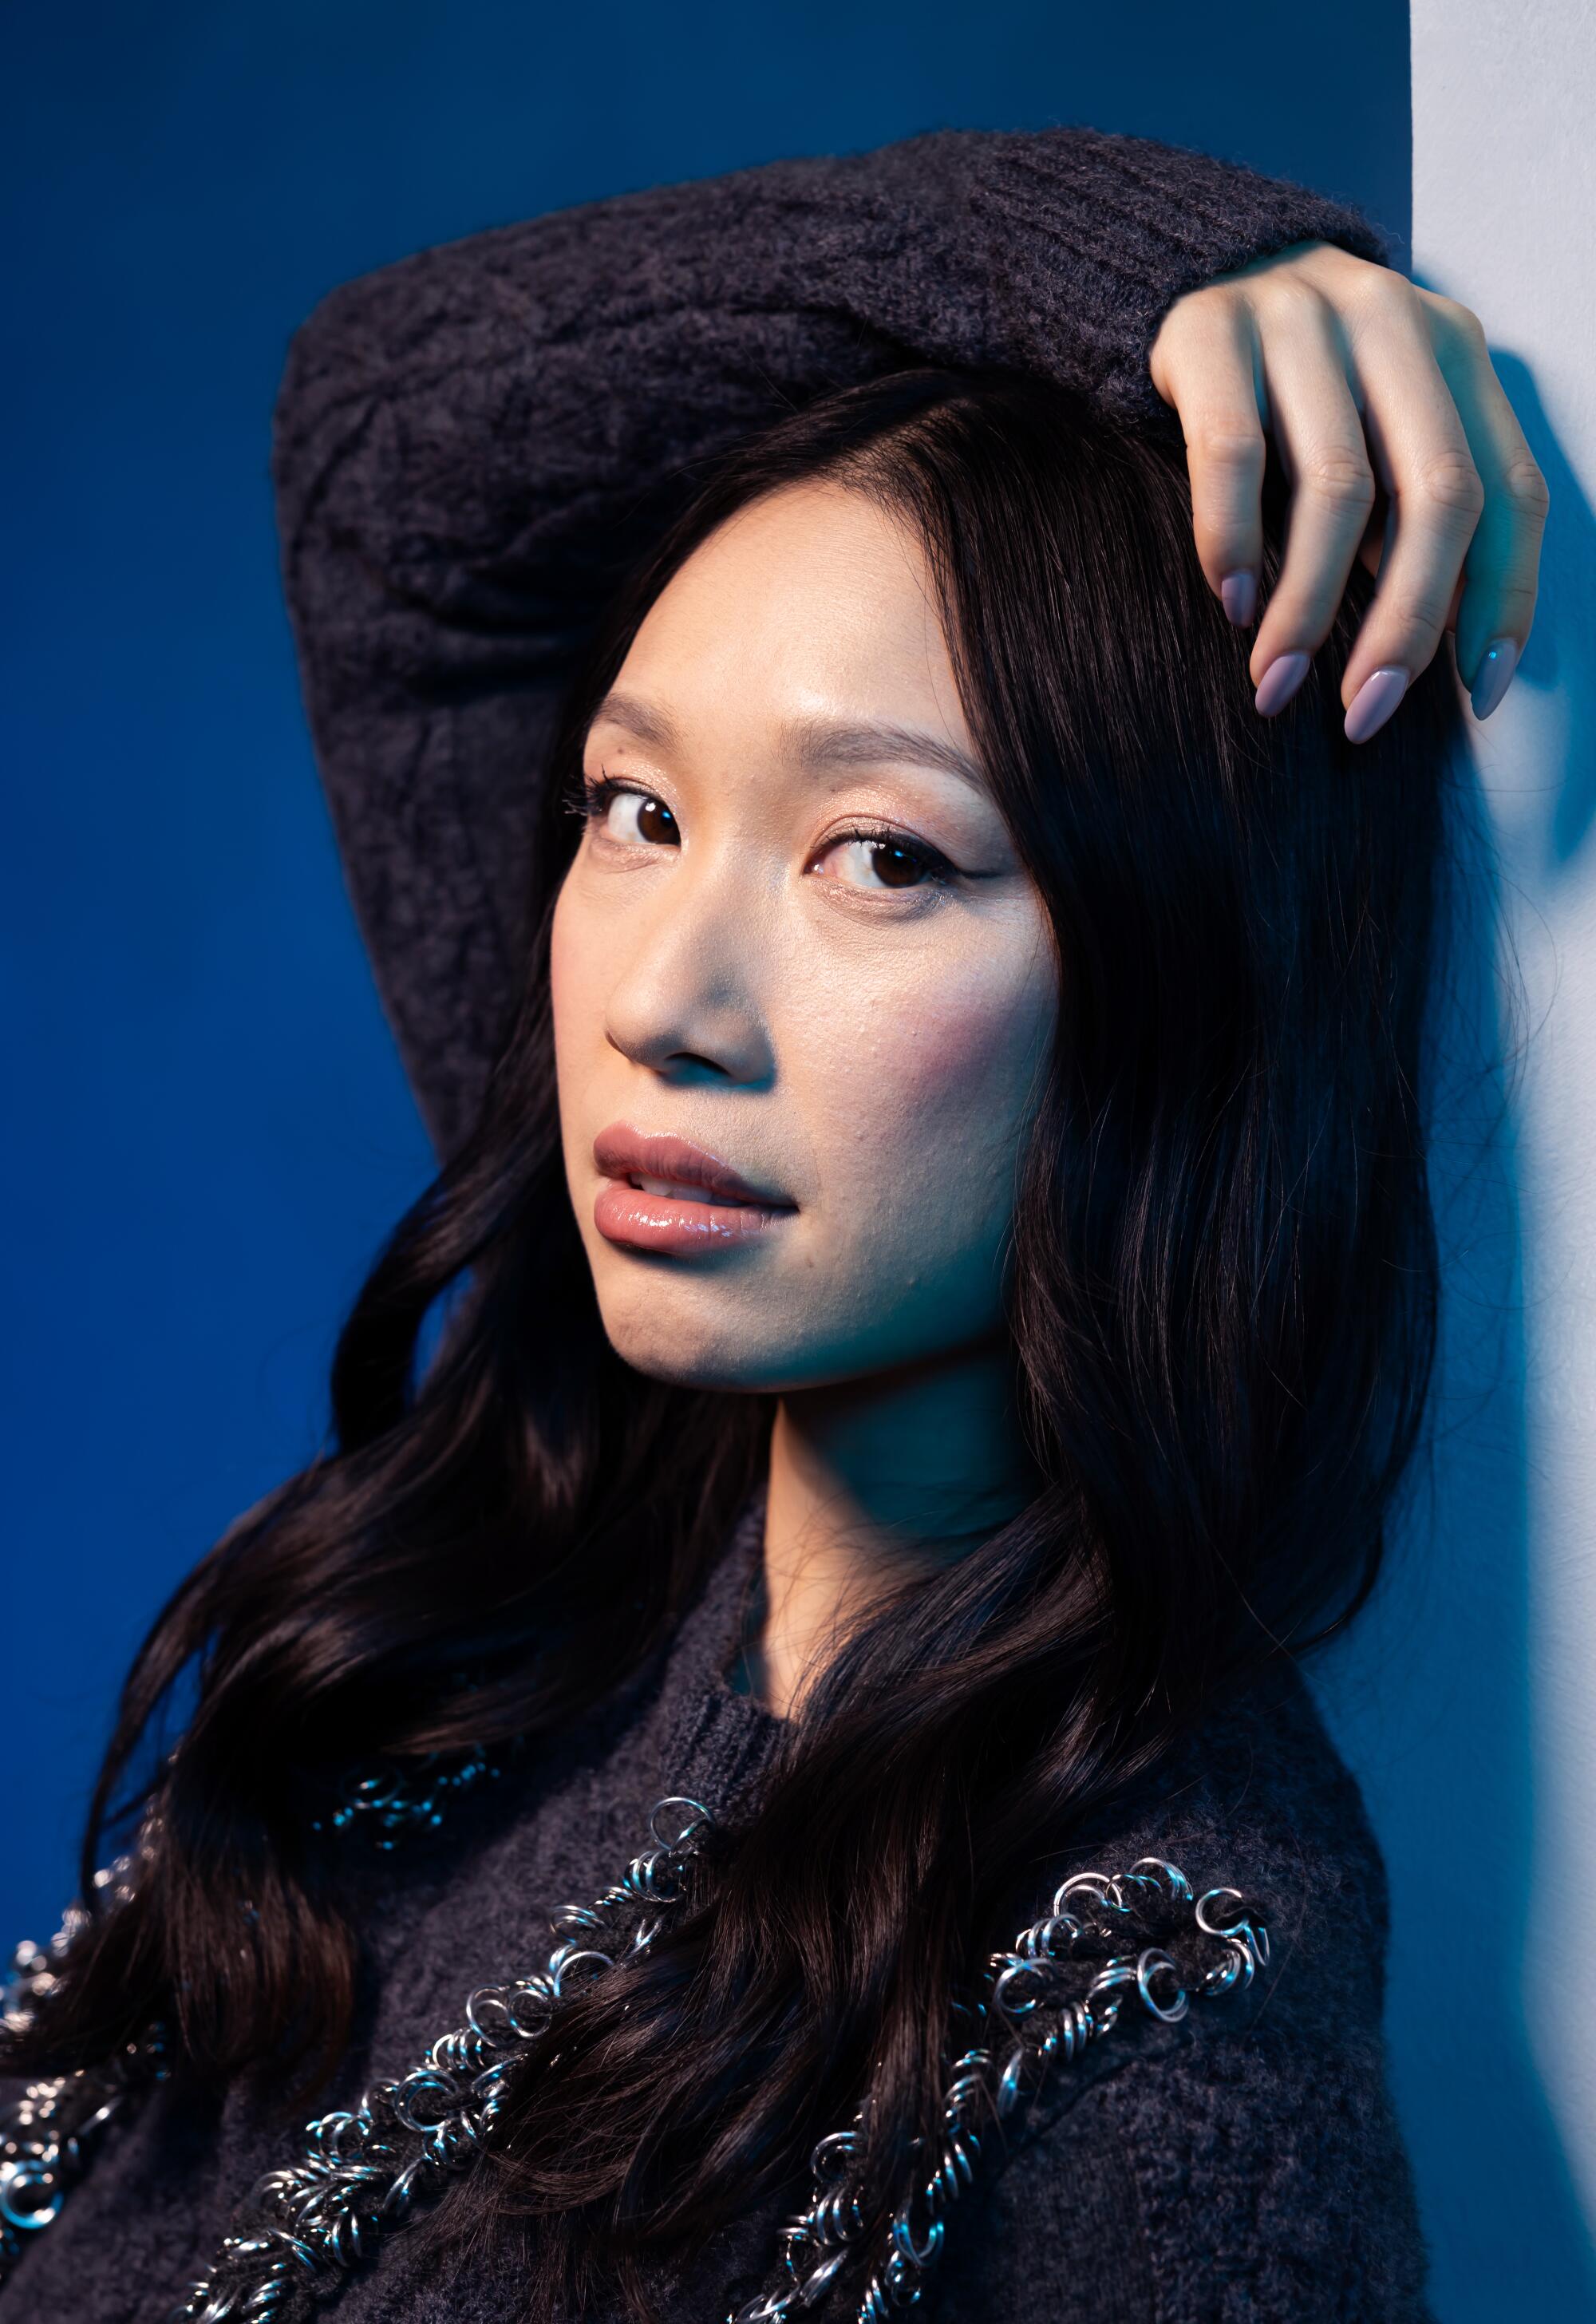 Jess Hong drapes an arm over head in a portrait.